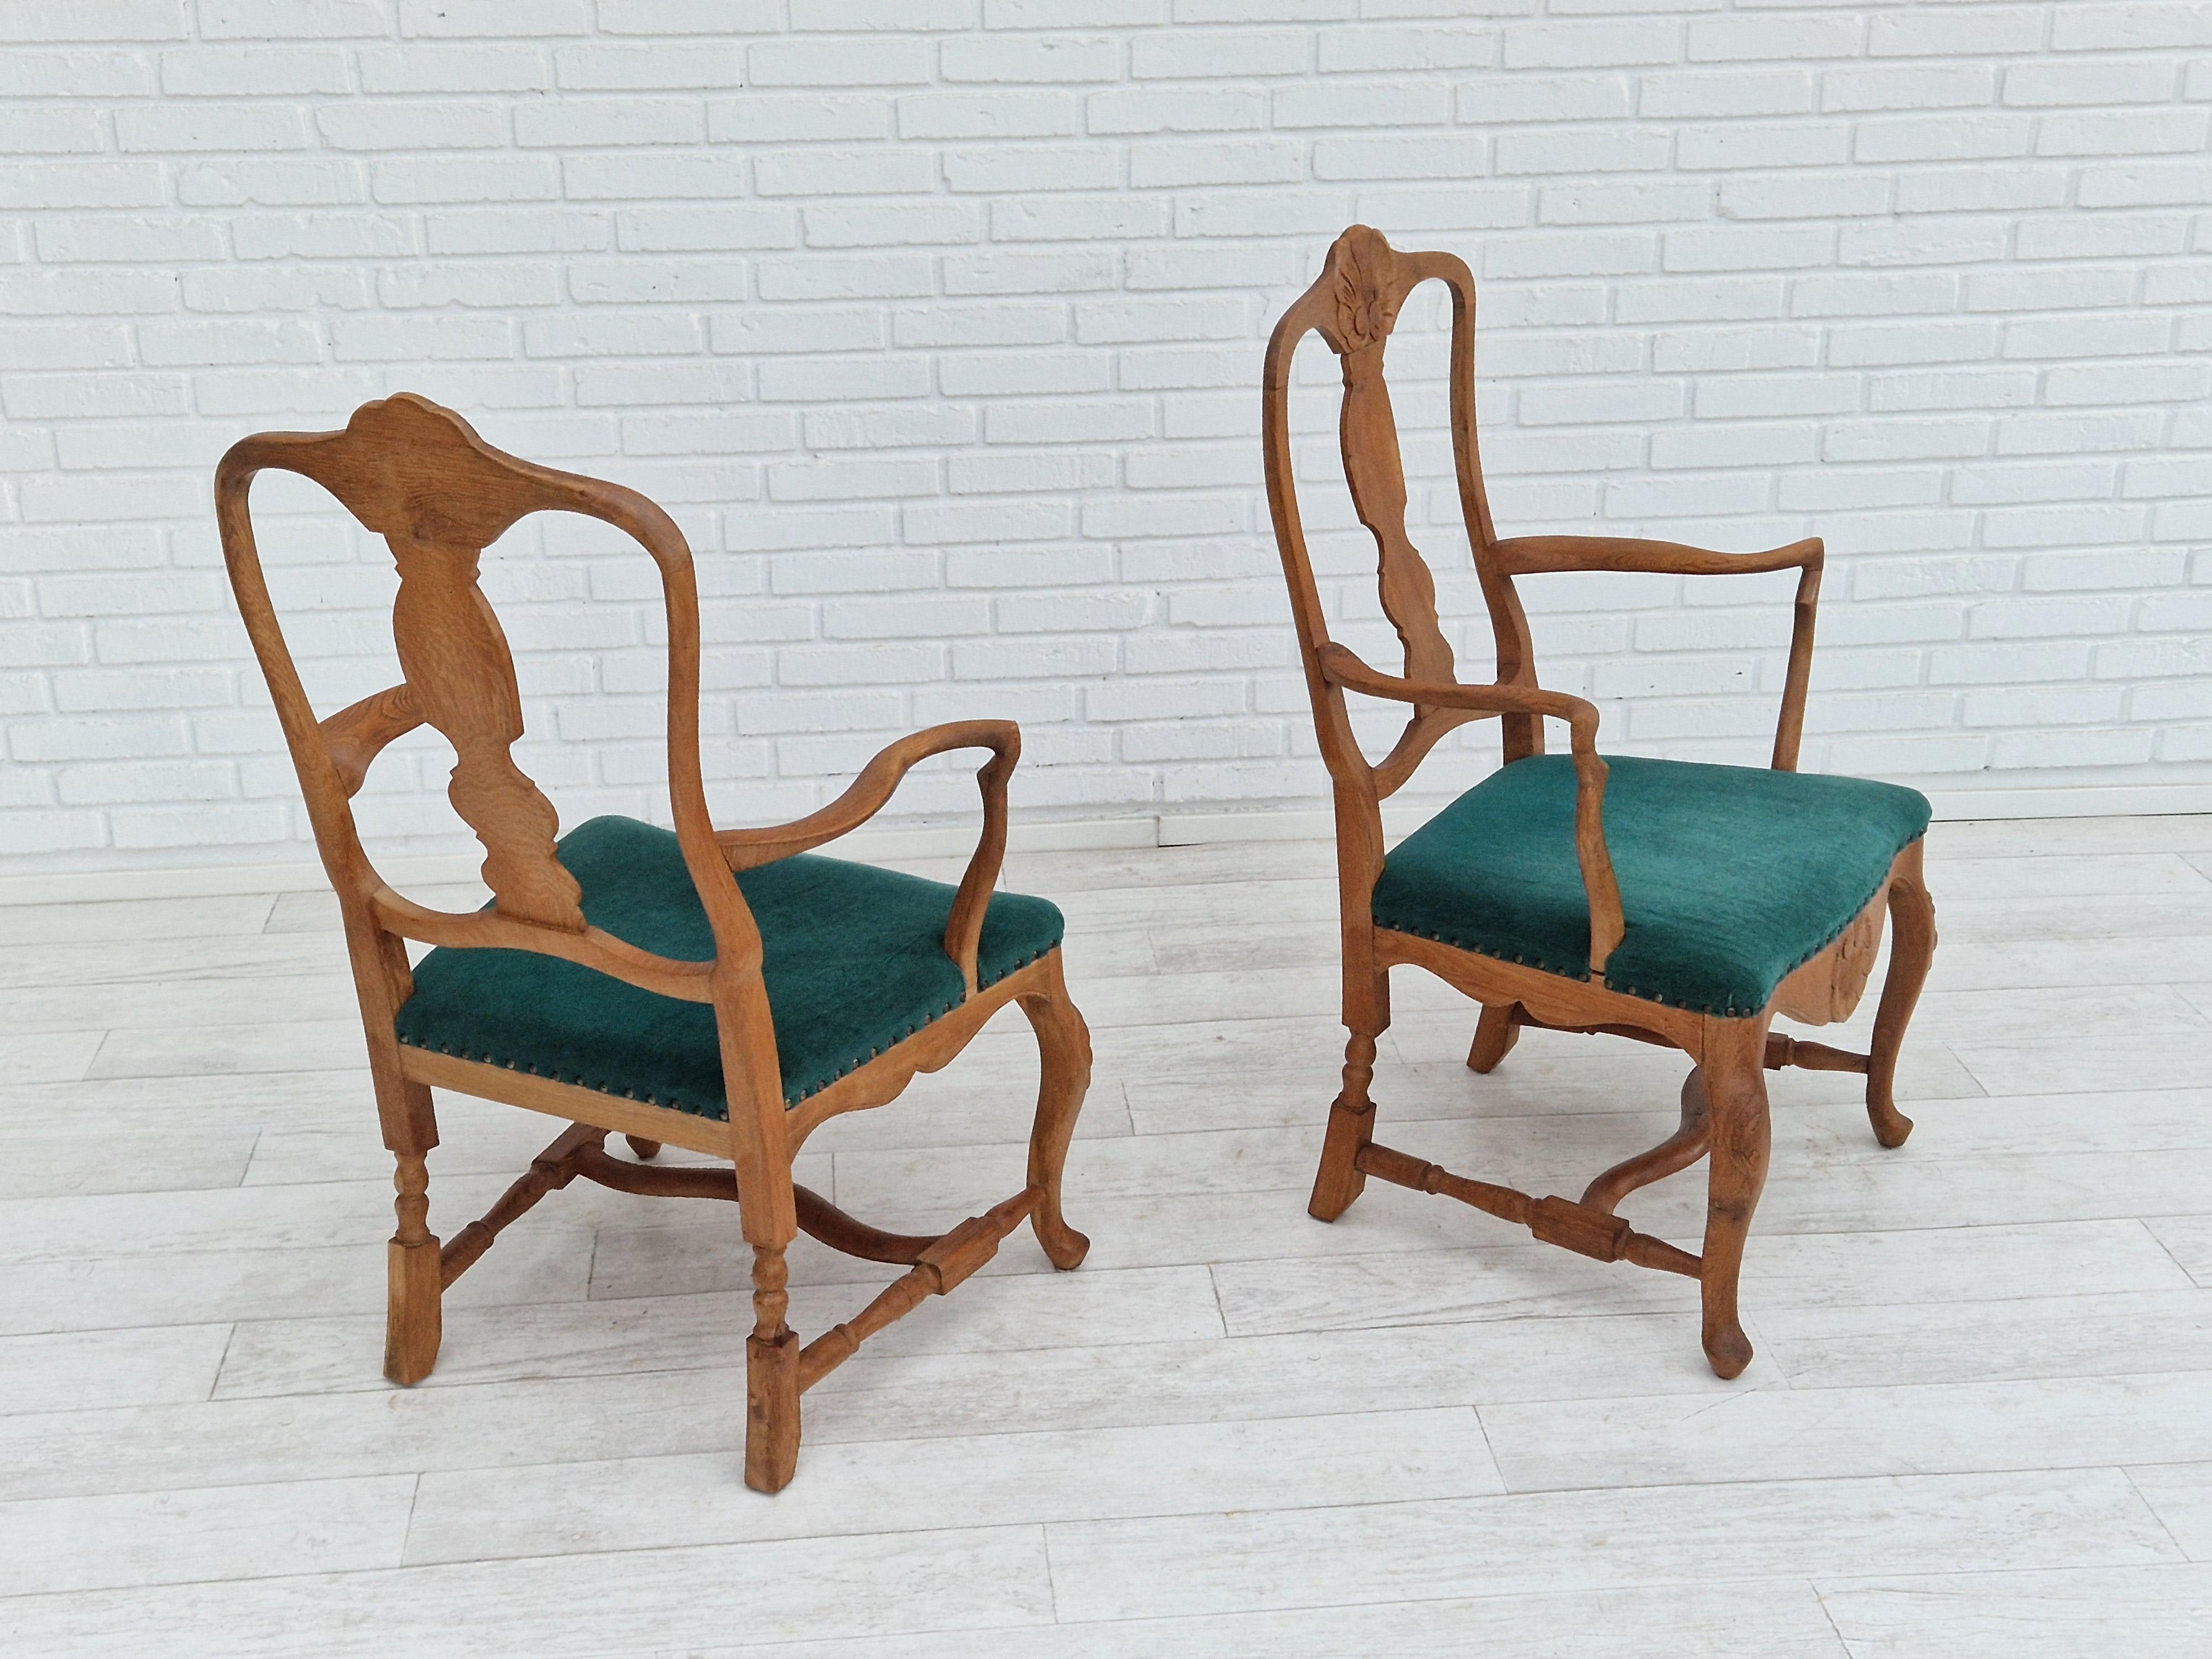 Mid-20th Century 1960s, Danish Design, Pair of Armchairs, Oak Wood, Original Very Good Condition For Sale